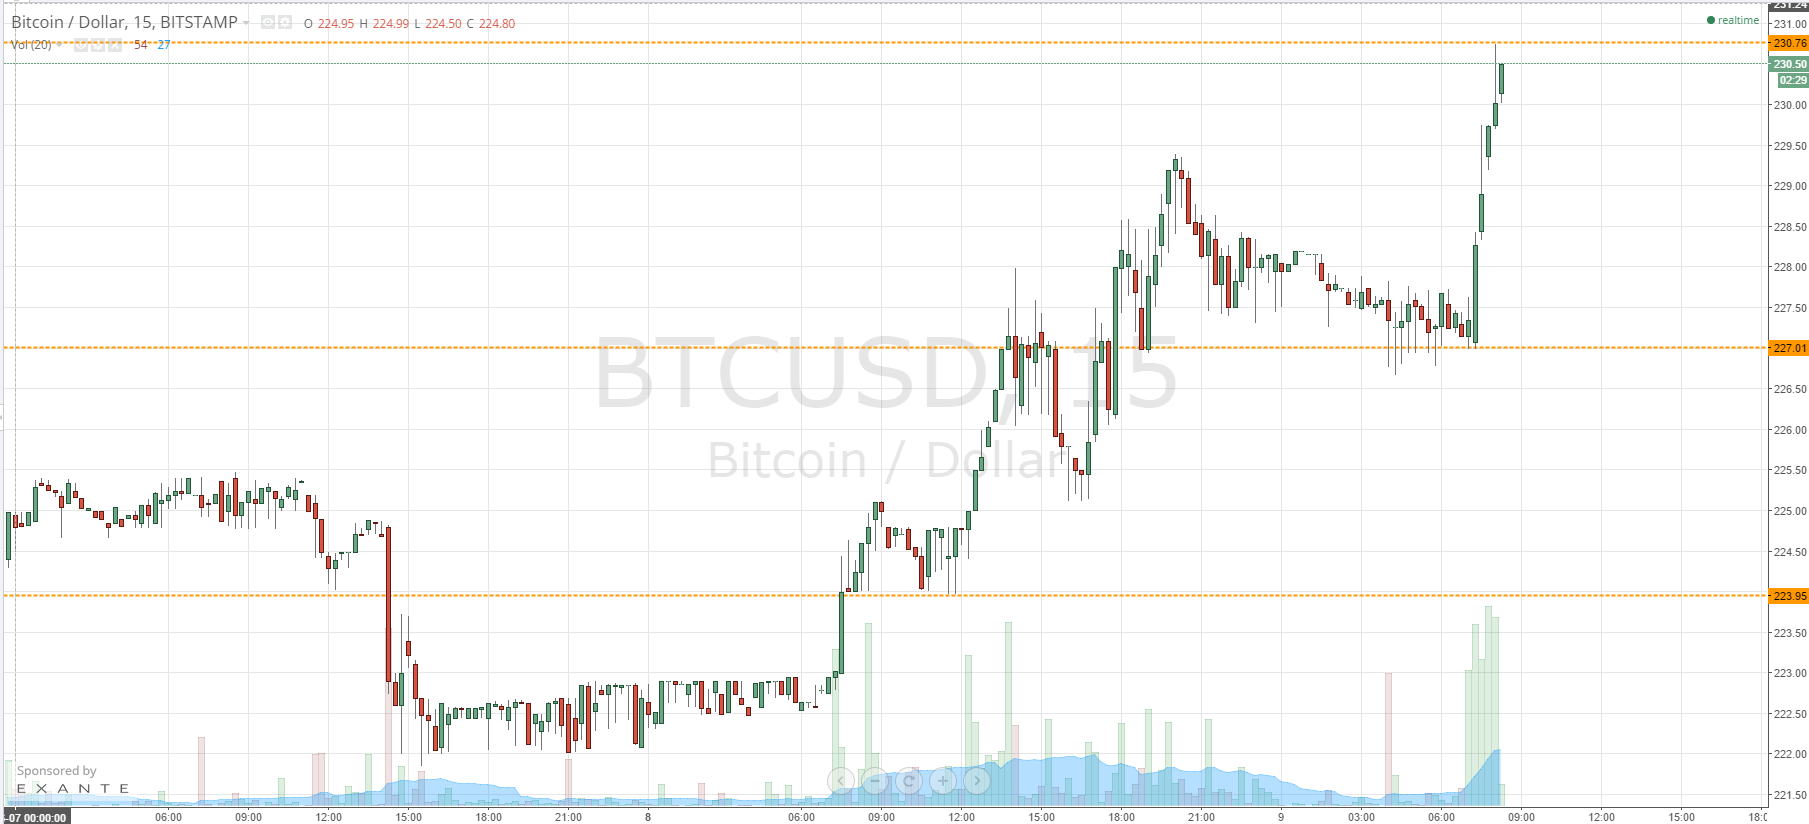 Bitcoin Price Gains Again; Hold on Tight!